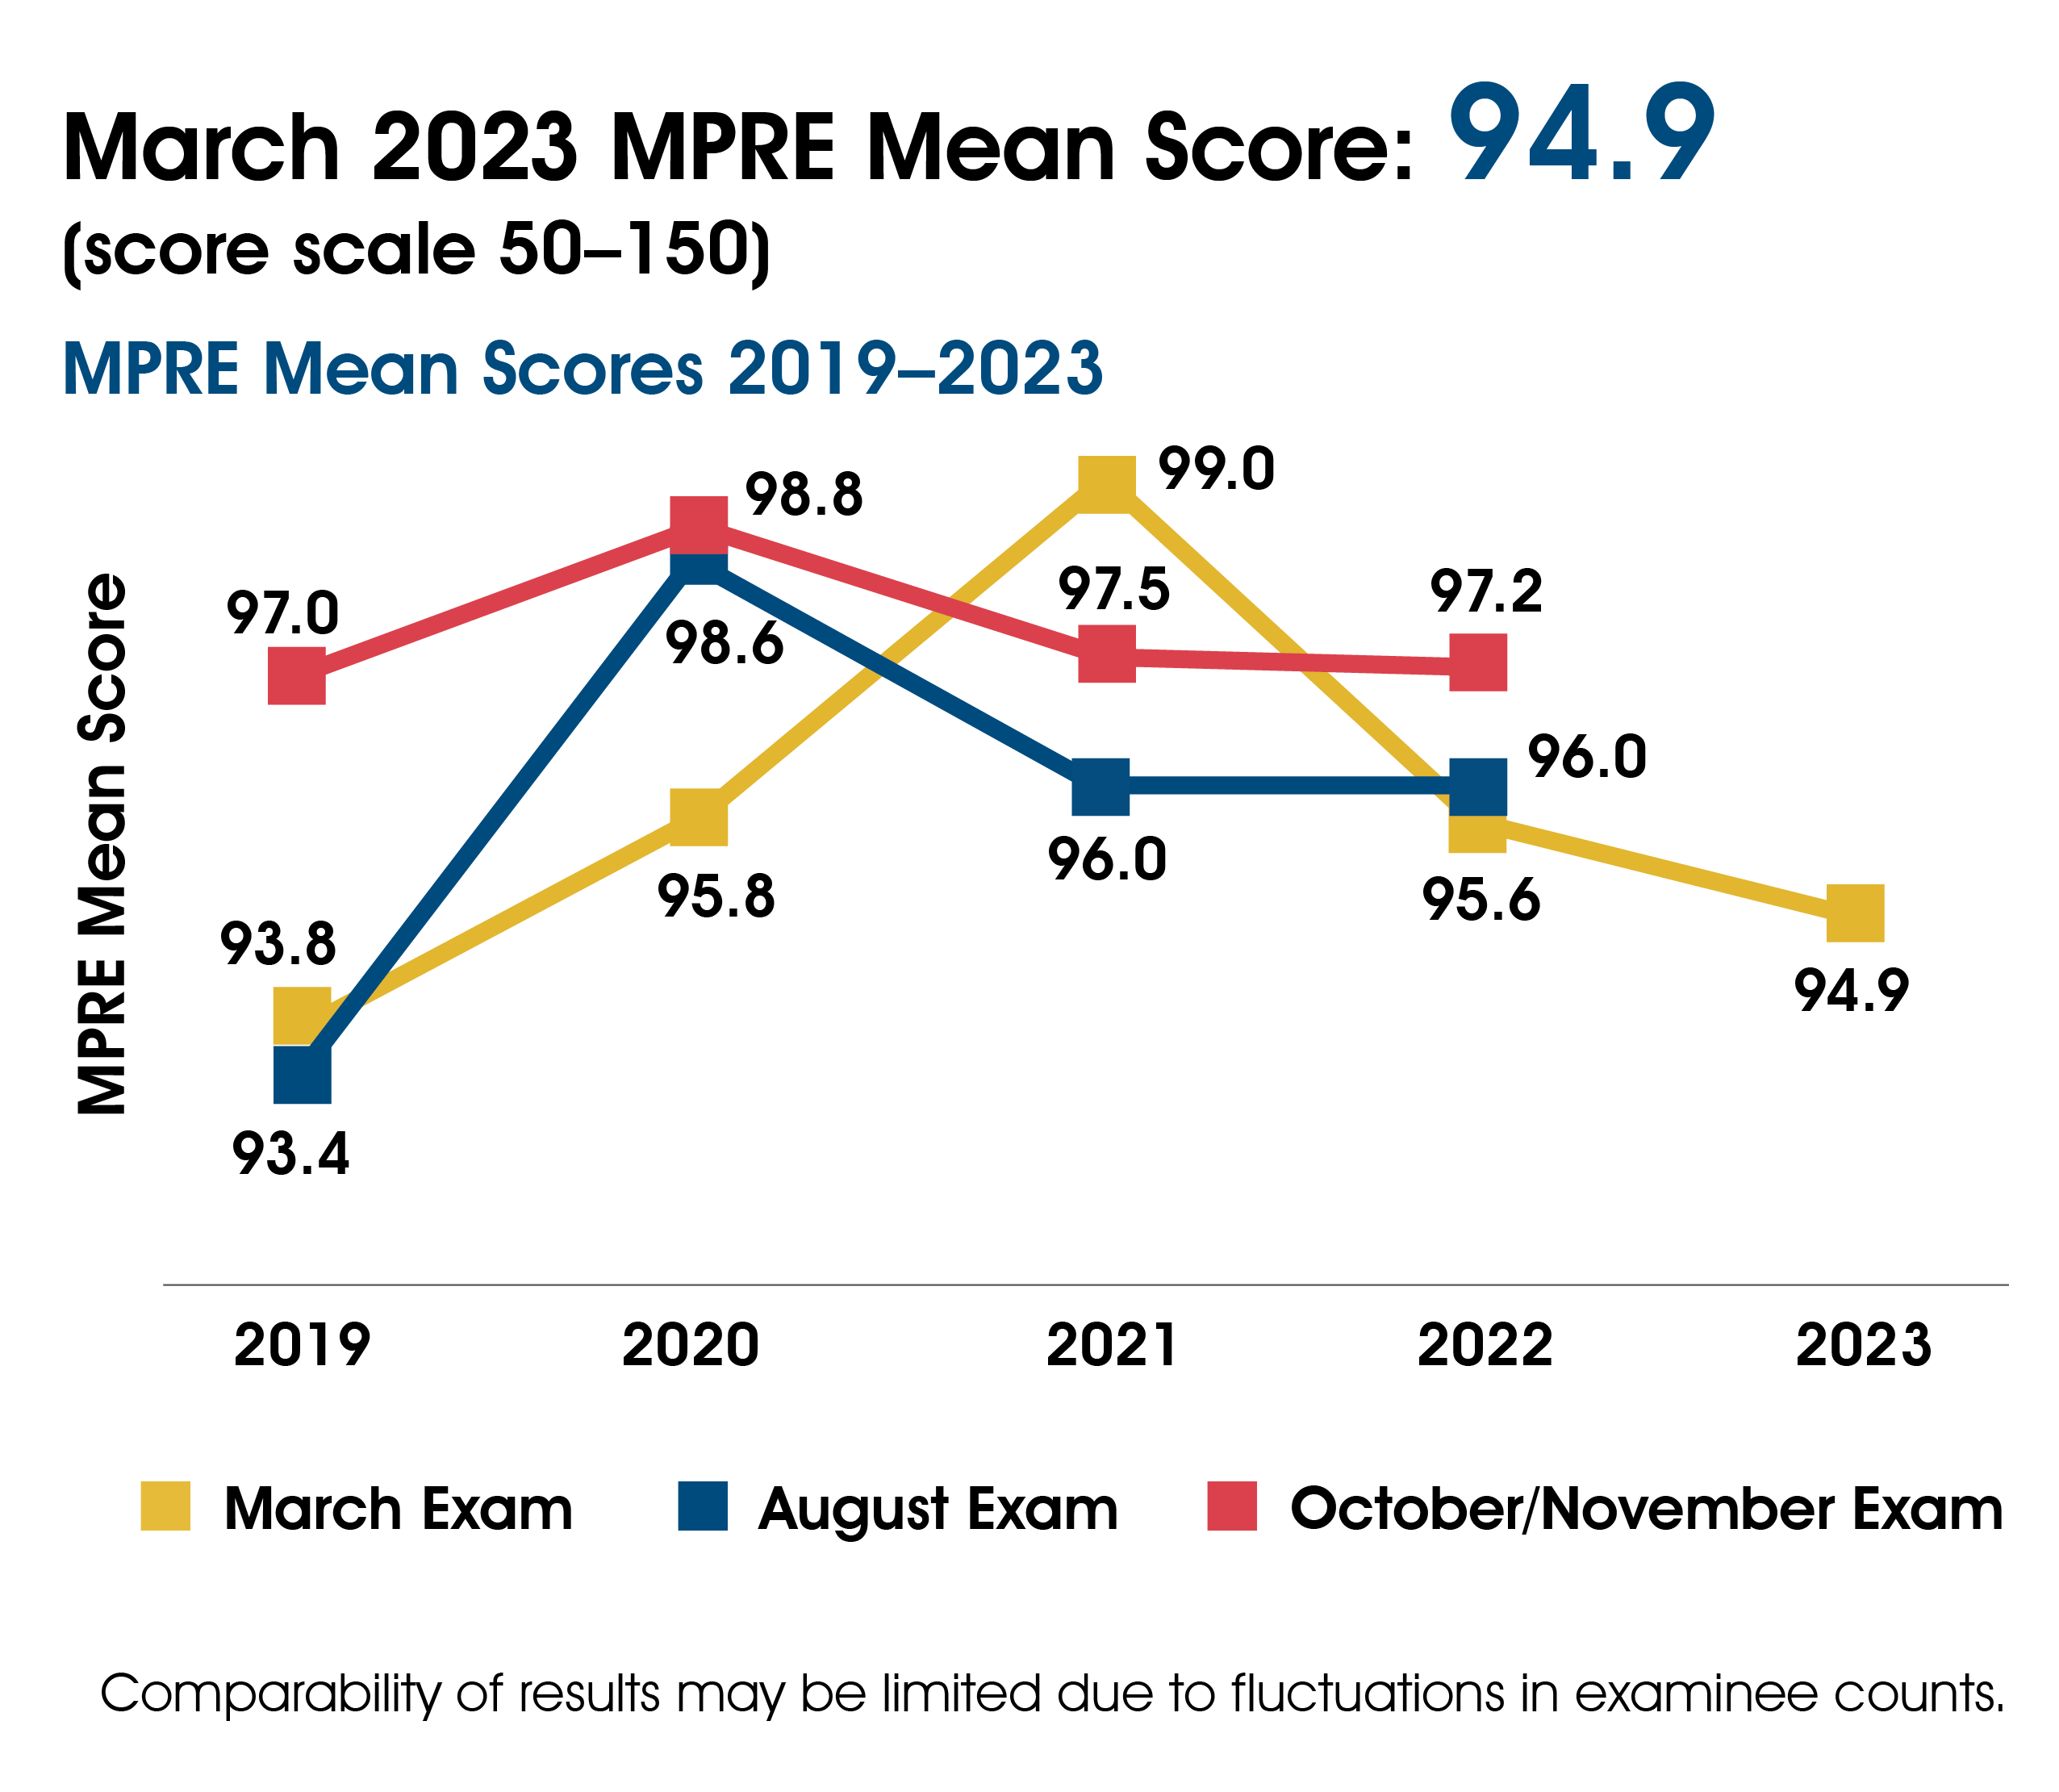 This graph shows the MPRE mean scores 2019-2023. In March 2019-2023 the mean score was 93.8, 95.8, 99.0, 95.6, and 94.9. In August 2019-2023 the mean score was 93.4, 98.6, 96.0, and 96.0. In October/November 2019-2023 the mean score was 97.0, 98.8, 97.5, and 97.2. The graph includes the following note: Comparability of results may be limited due to fluctuations in examinee counts.